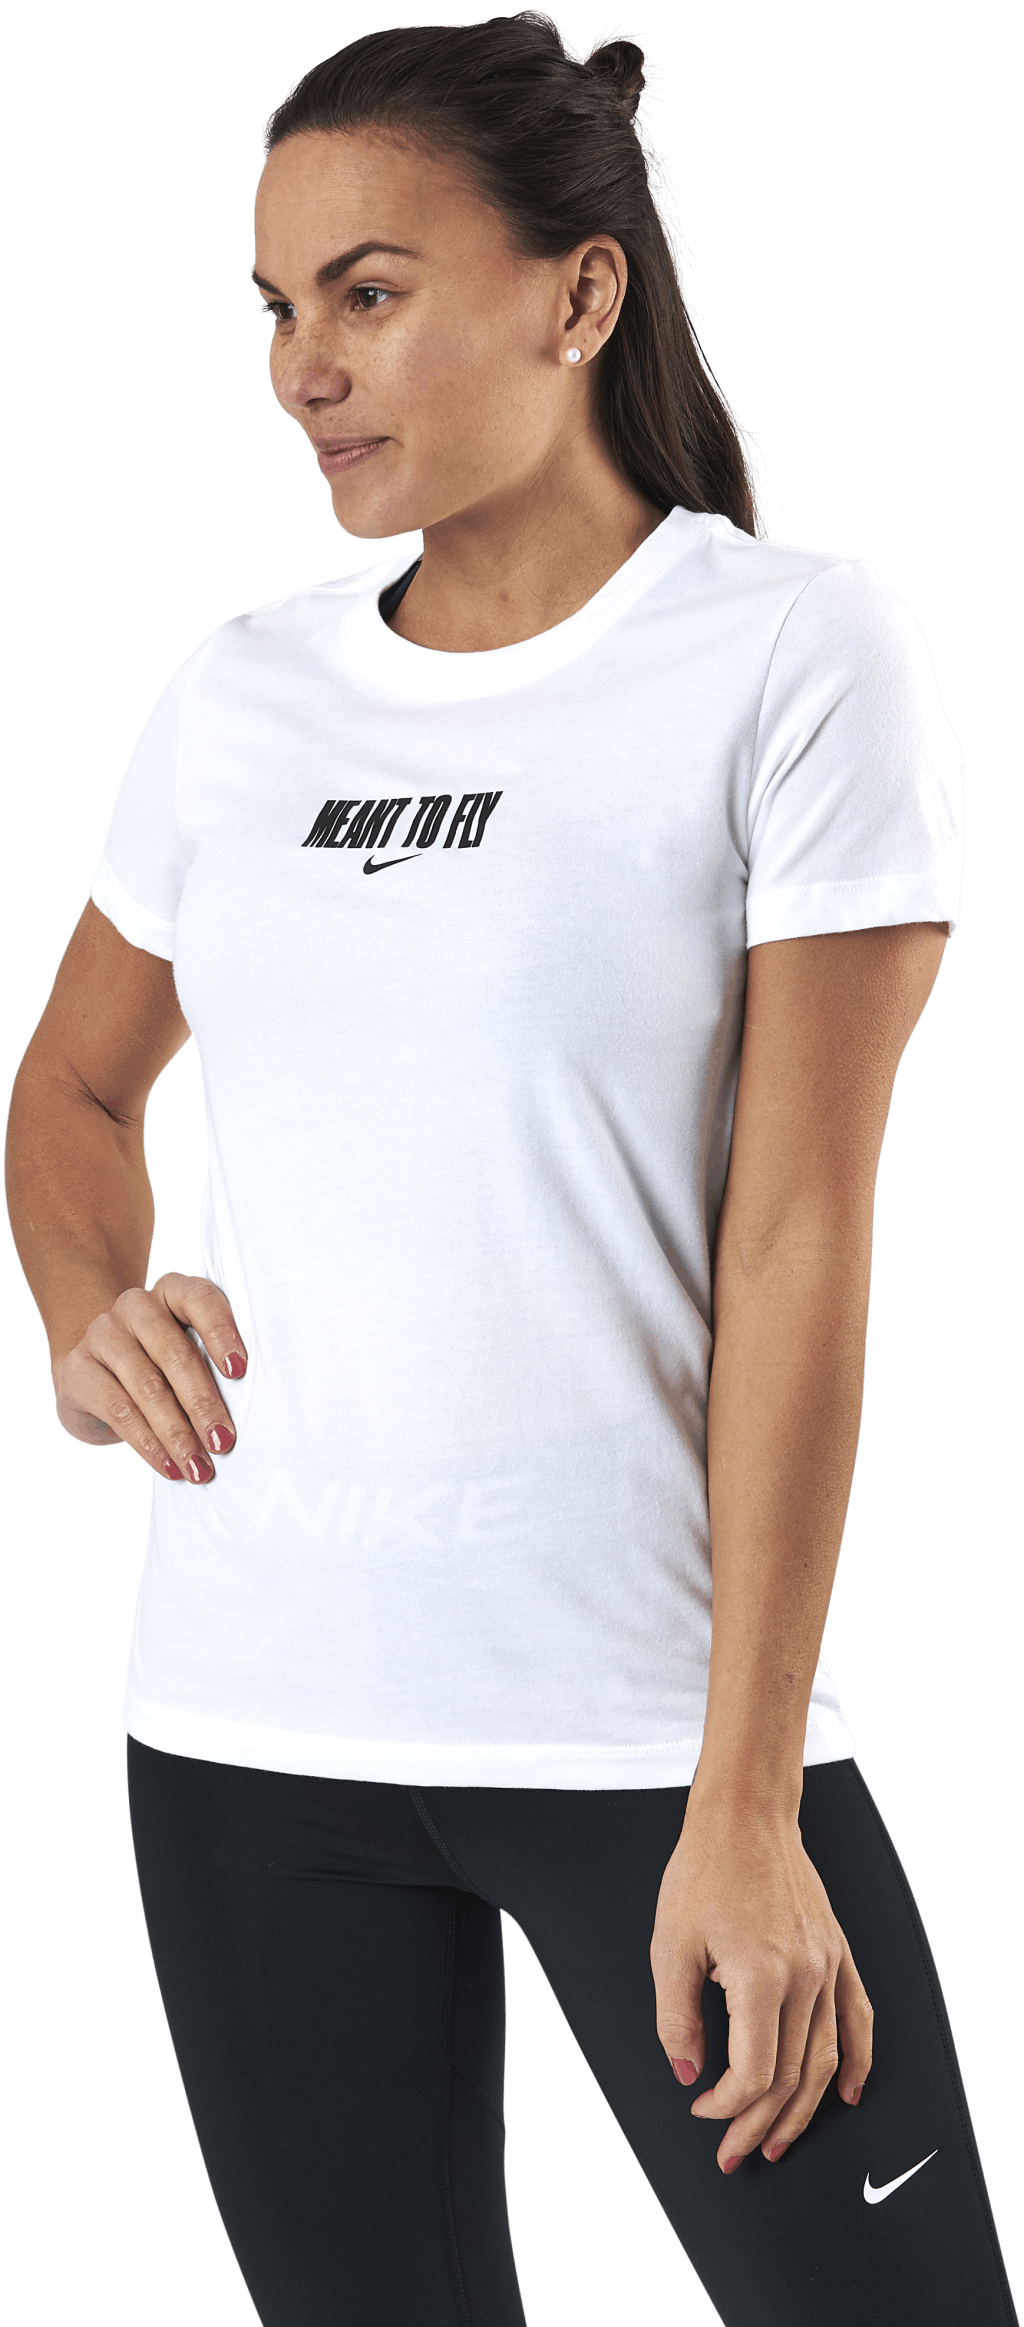 Womens Dri-Fit Tee - Meant To Fly White